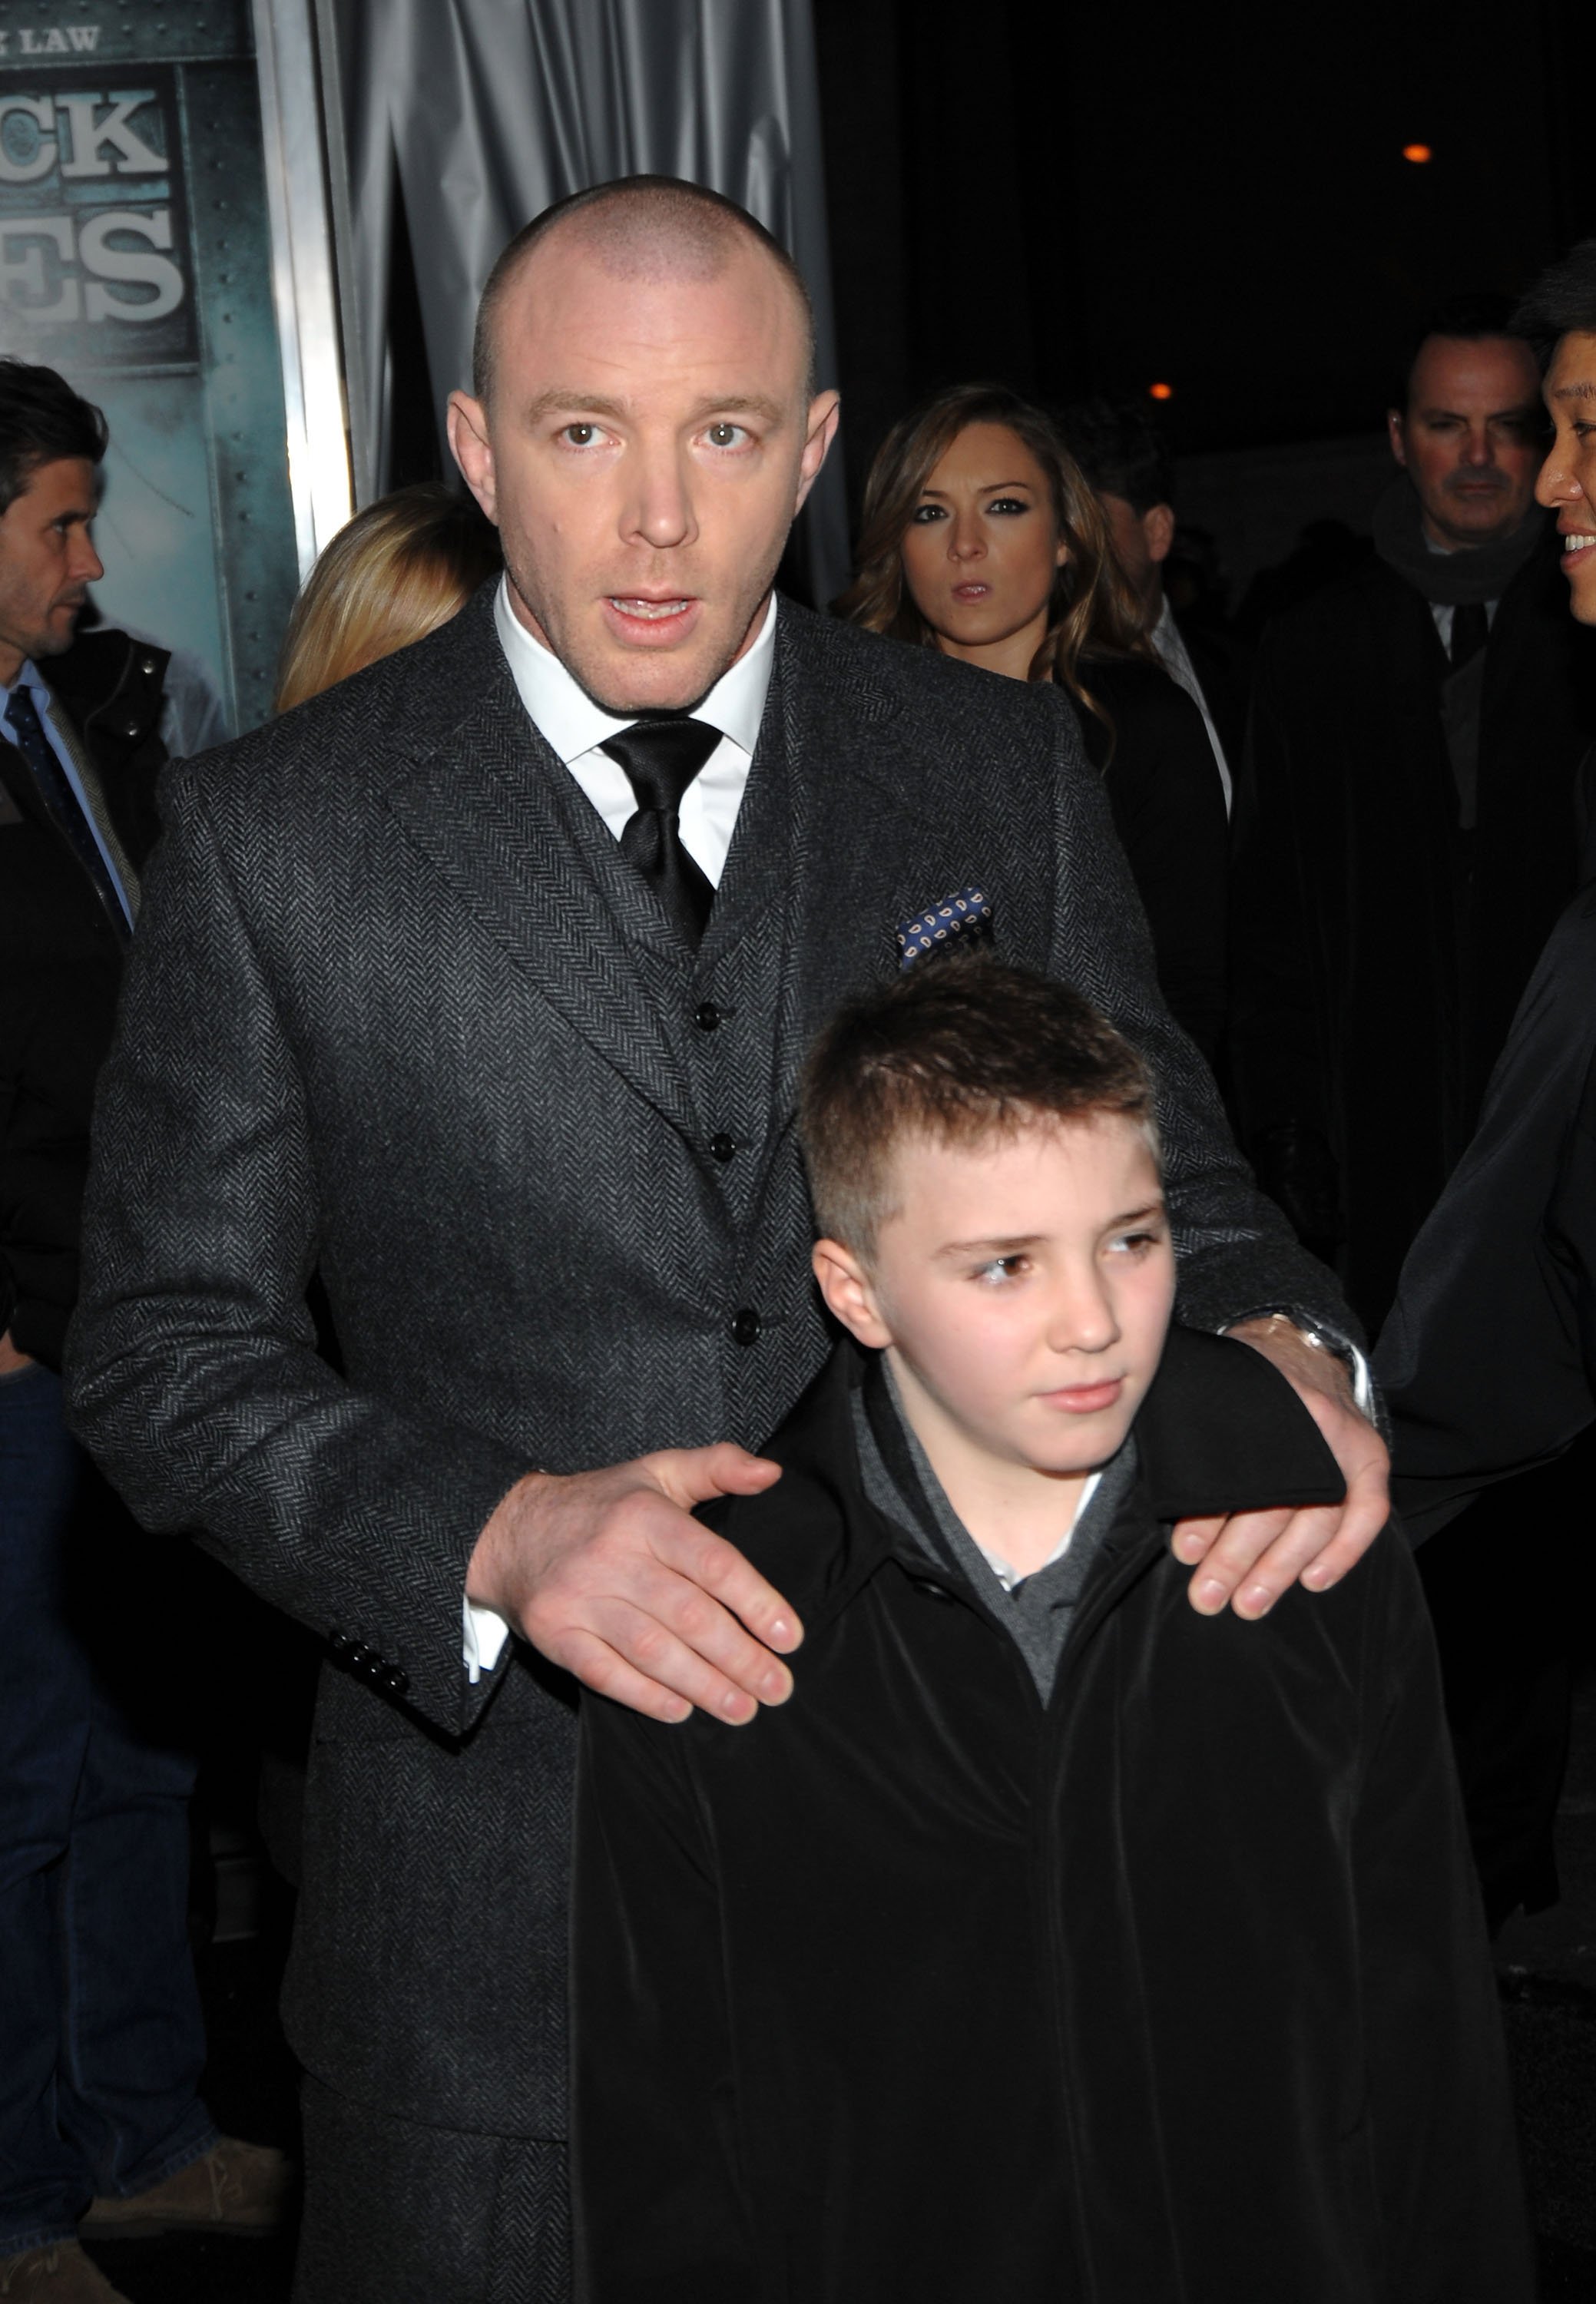 Rocco Ritchie and father, Guy Ritchie attend the premiere of "Sherlock Holmes" at the Alice Tully Hall, Lincoln Center on December 17, 2009 in New York City. | Source: Getty Images